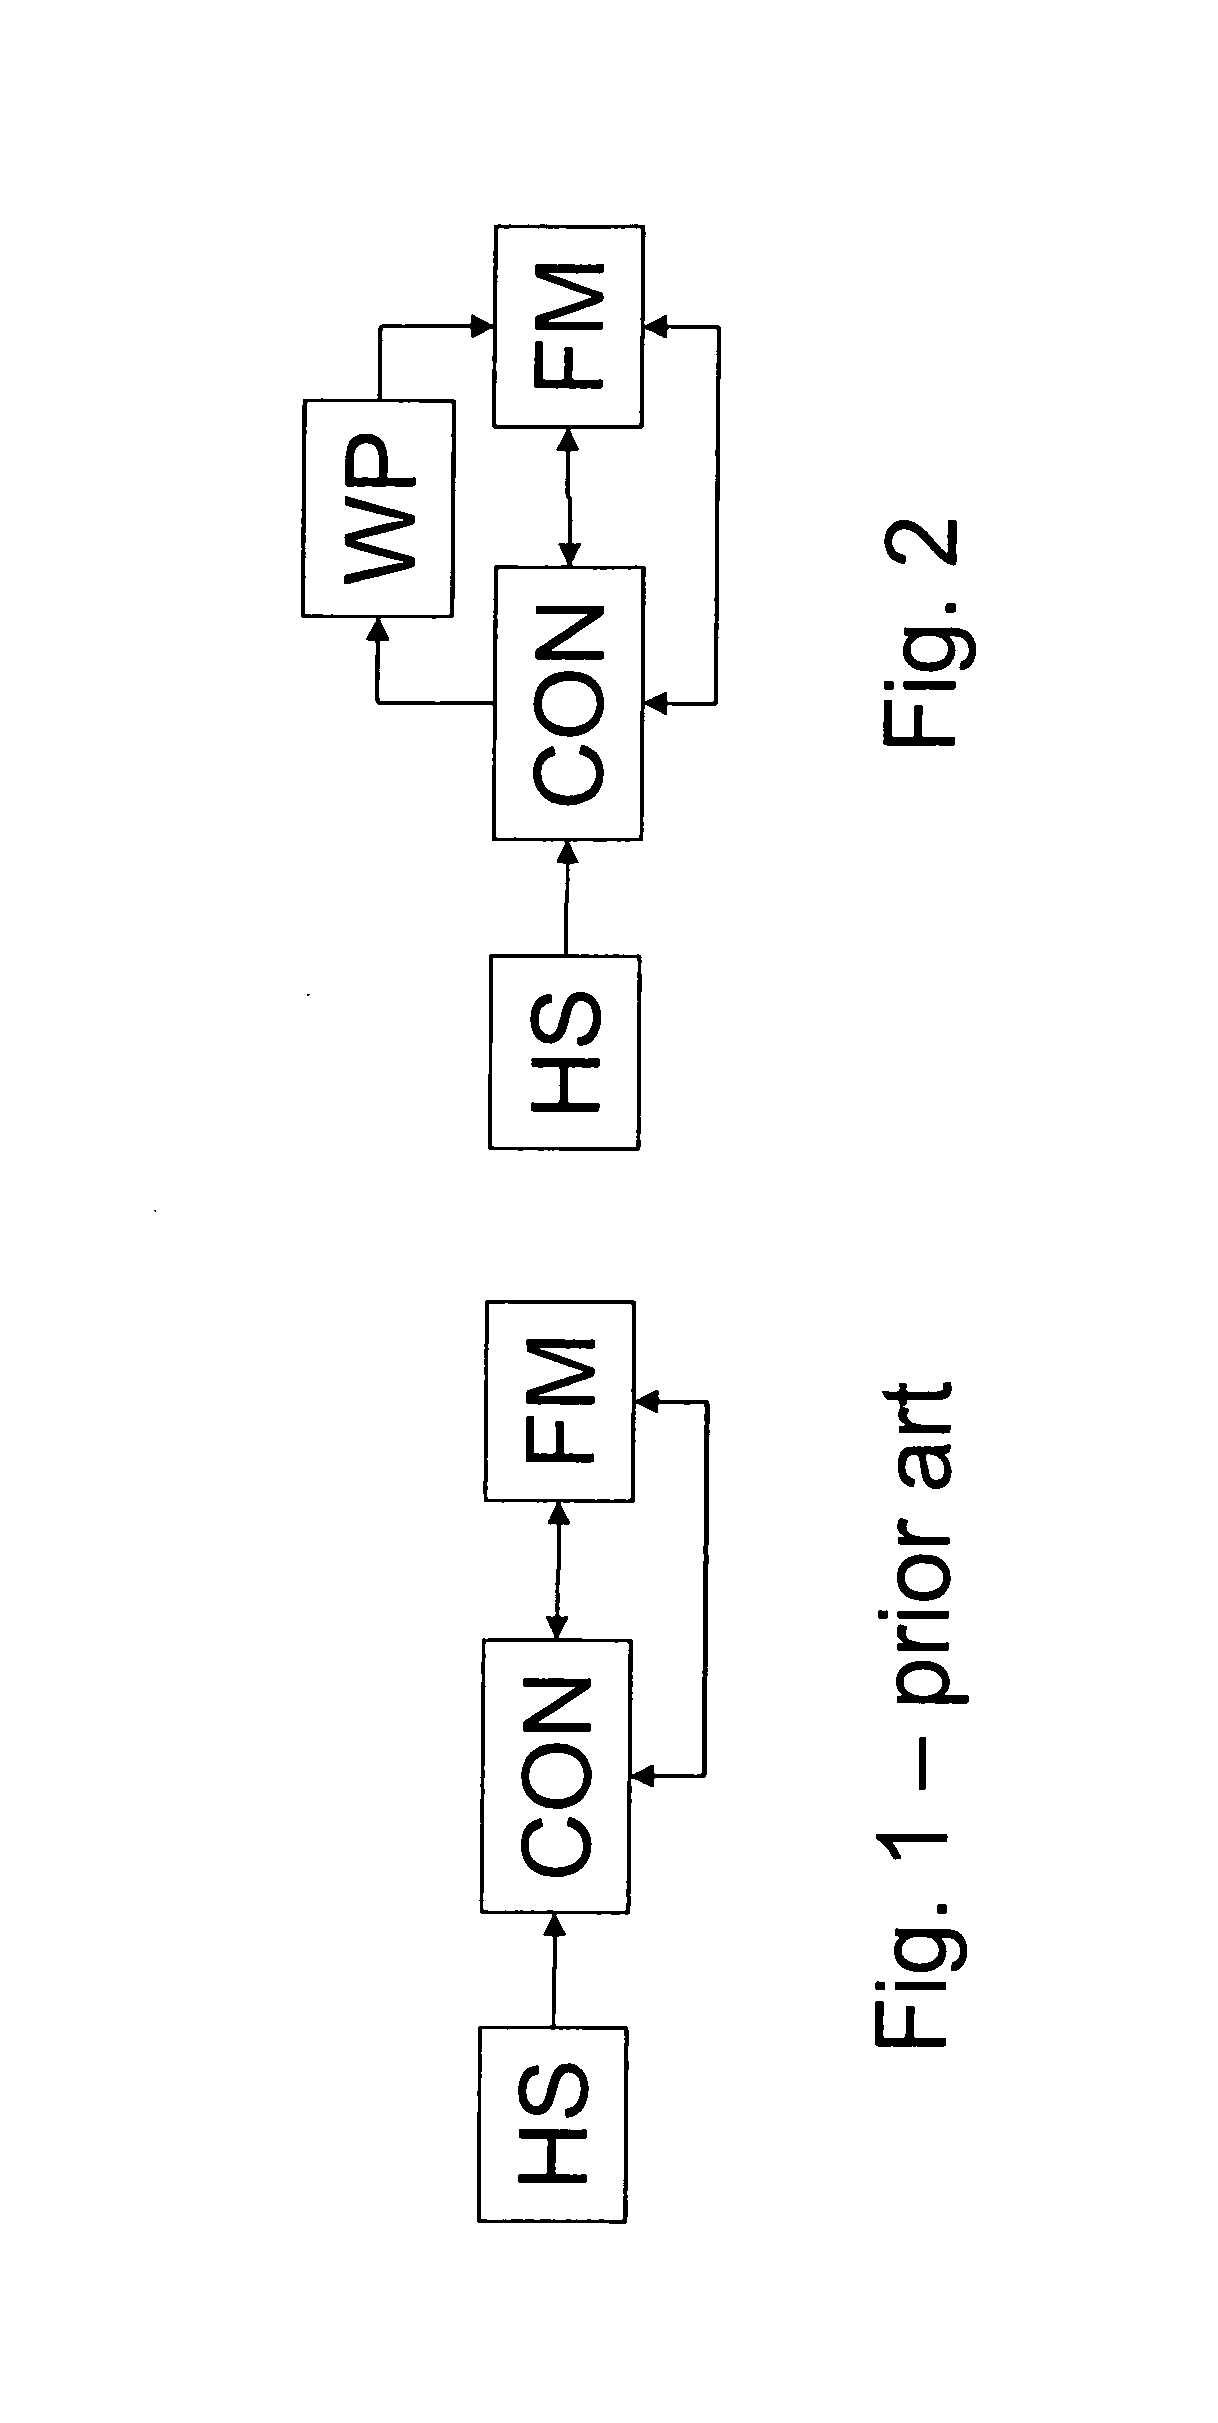 Non-volatile storage device with forgery-proof permanent storage option